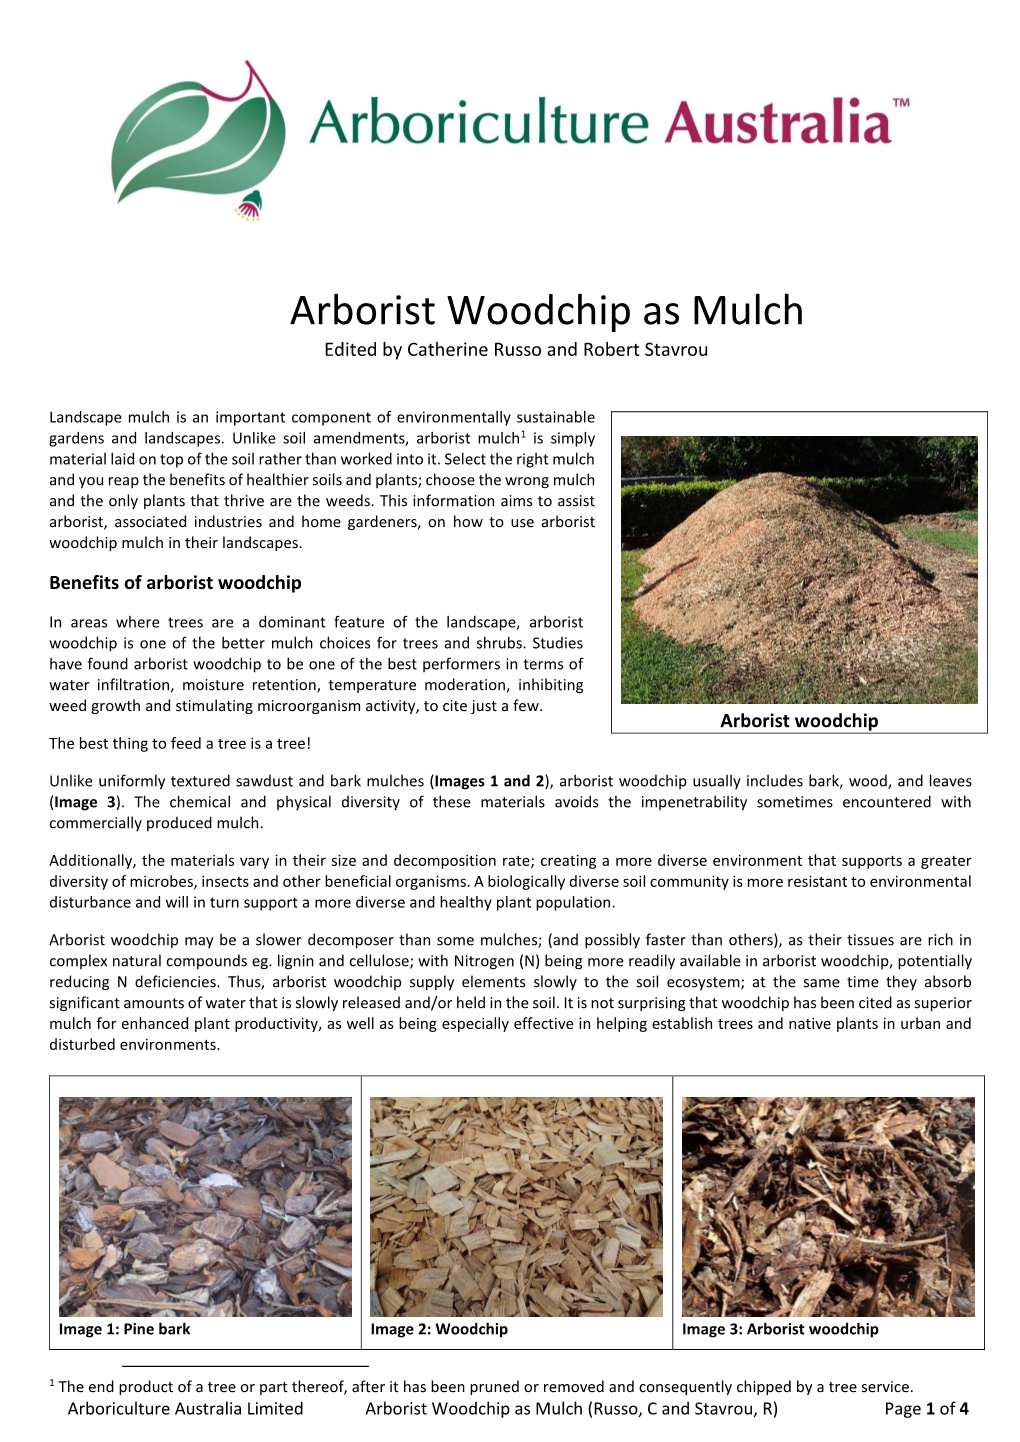 Arborist Woodchip As Mulch Edited by Catherine Russo and Robert Stavrou